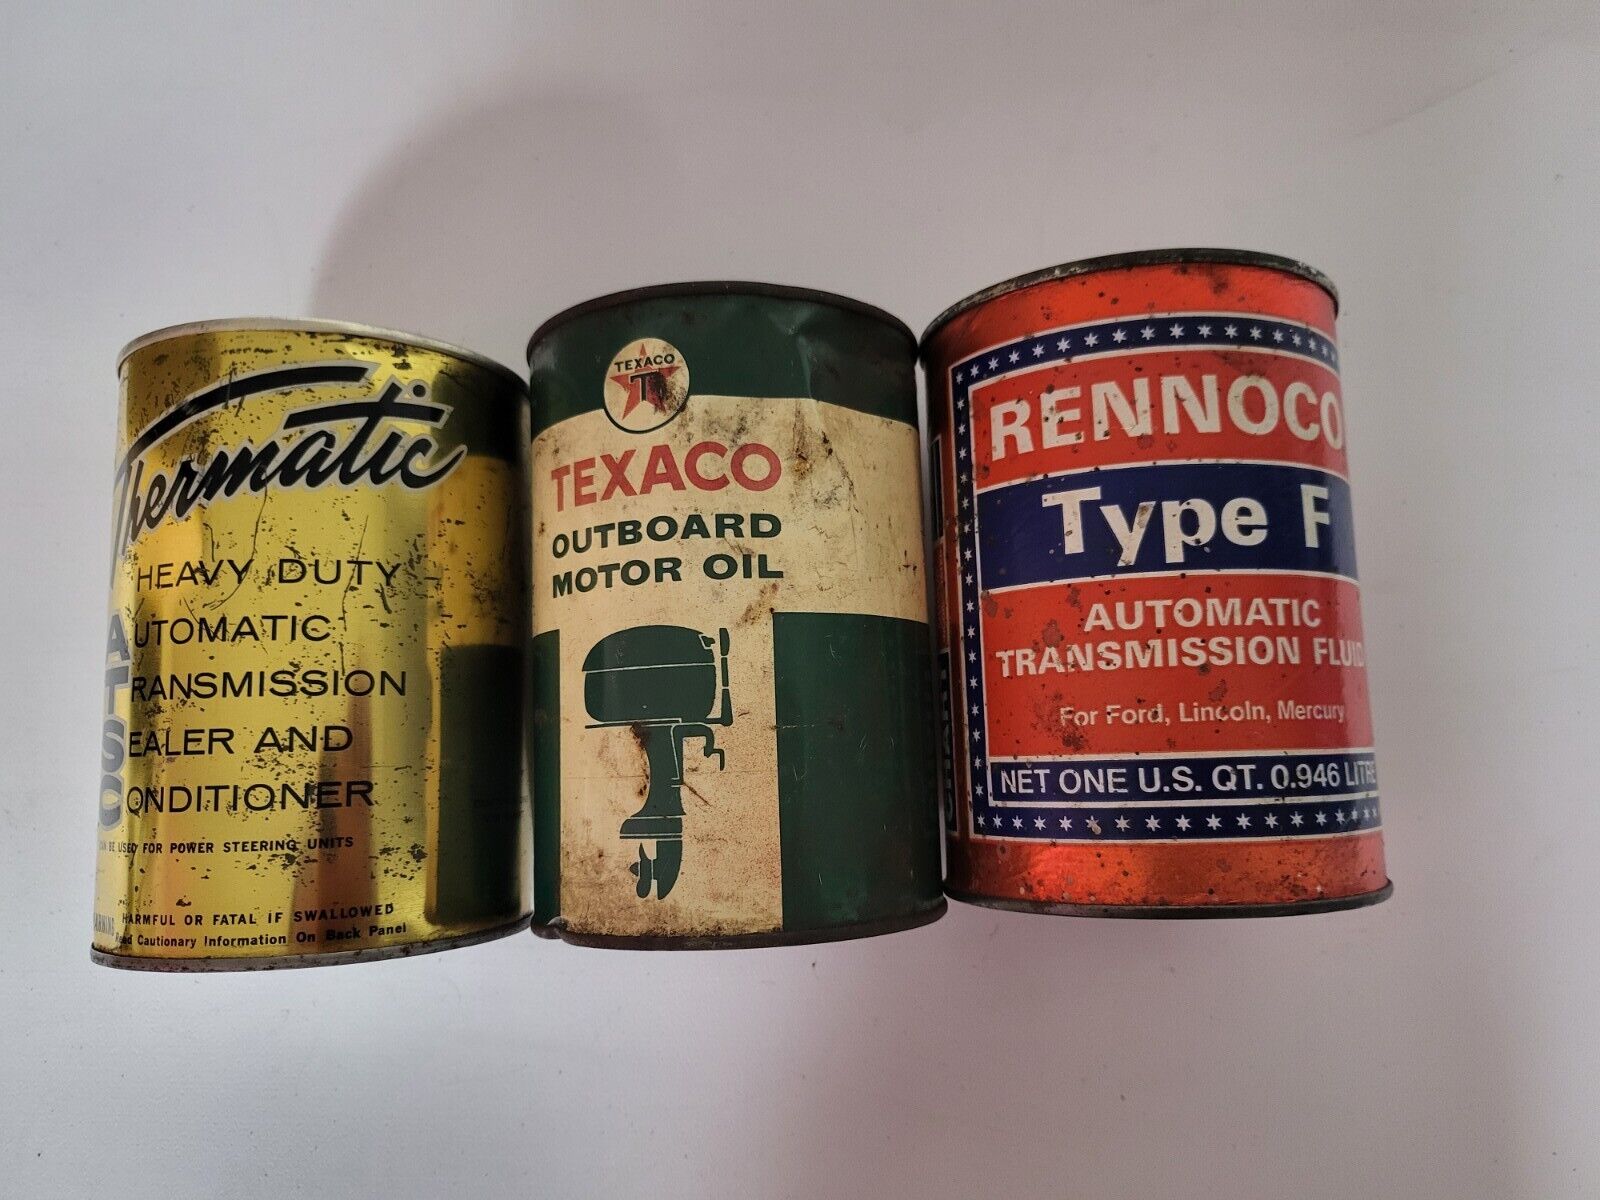 3 VINTAGE UNOPENED CANS. 1 TEXACO OUTBOARD MOTOR OIL, 1 RENNOCO TYPE F TRANS...